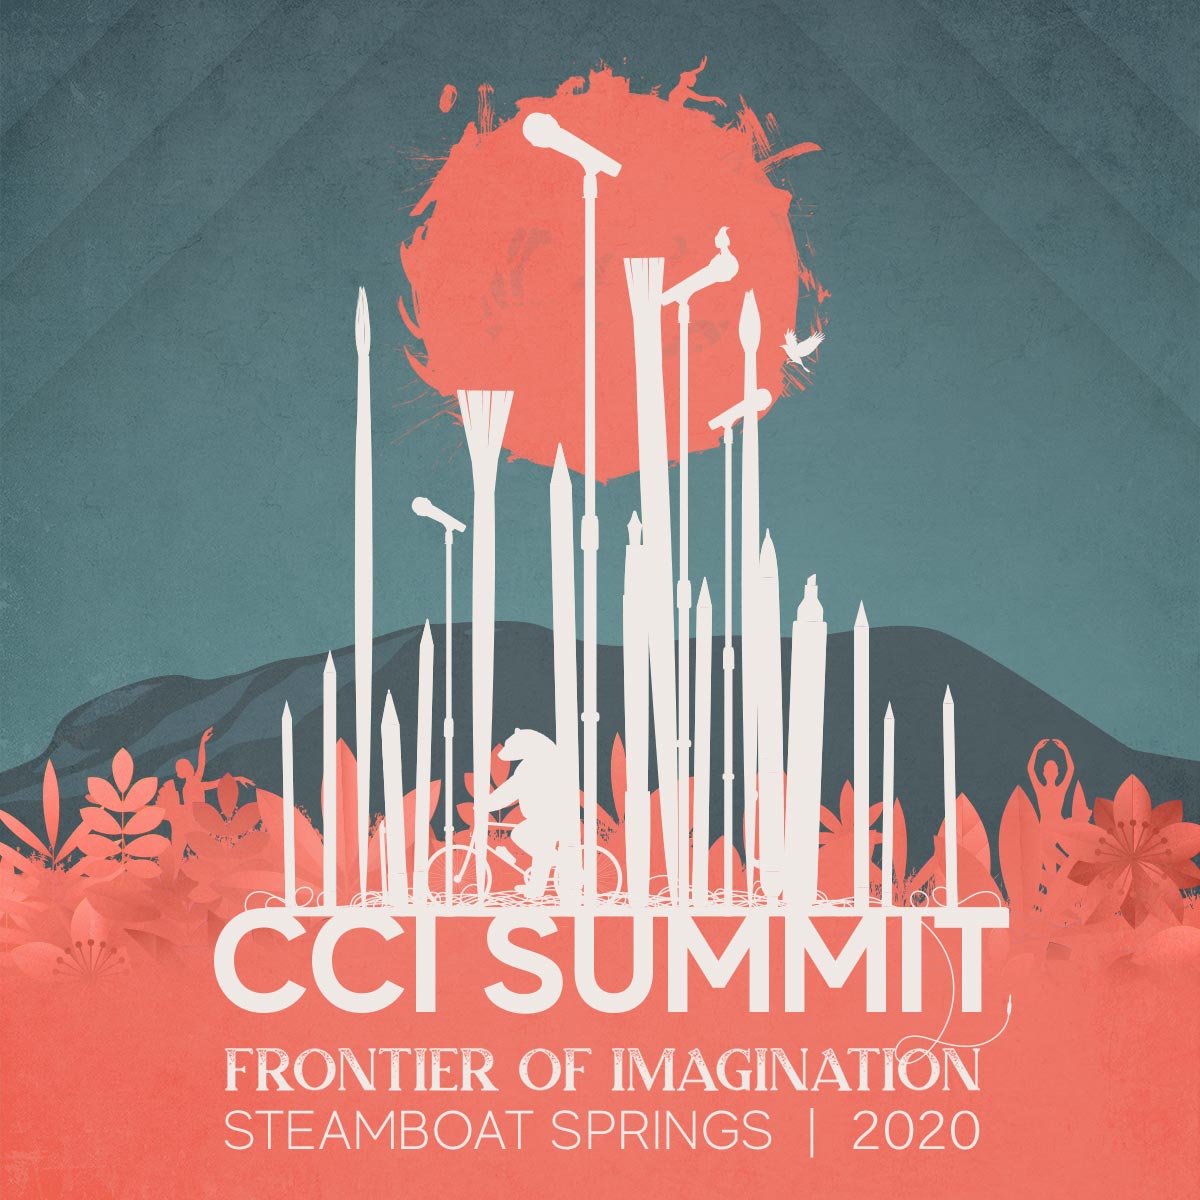 The Colorado Creative Industries Summit is just around the corner on May 14-15! Register for this fun gathering (this year in Steamboat Springs!) before April 1 for the early-bird discount. coloradocreativeindustries.org/summit/